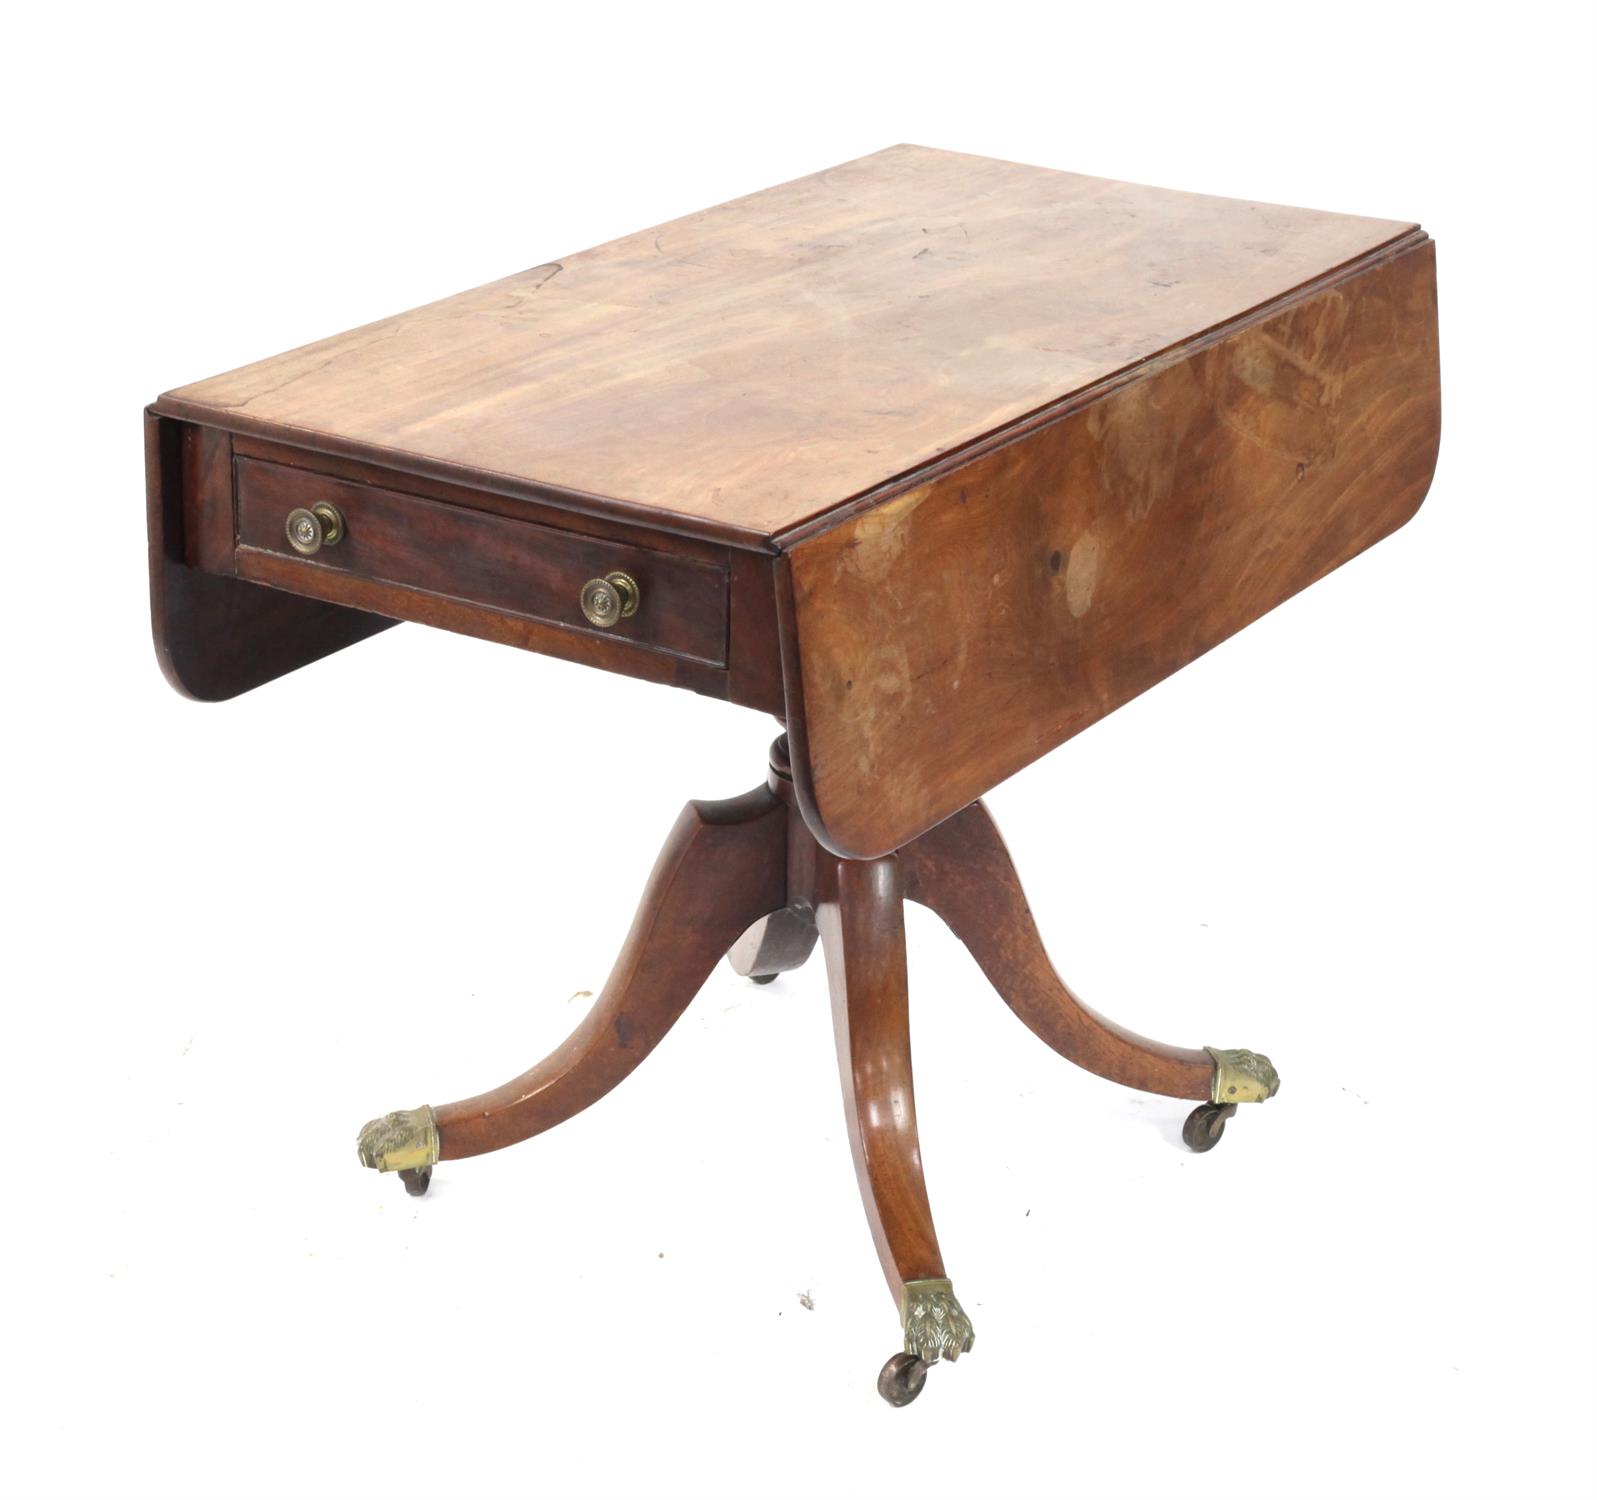 19th Century Mahogany Pembroke table, with a single drawer, on a centre pillar and turned column - Image 3 of 5